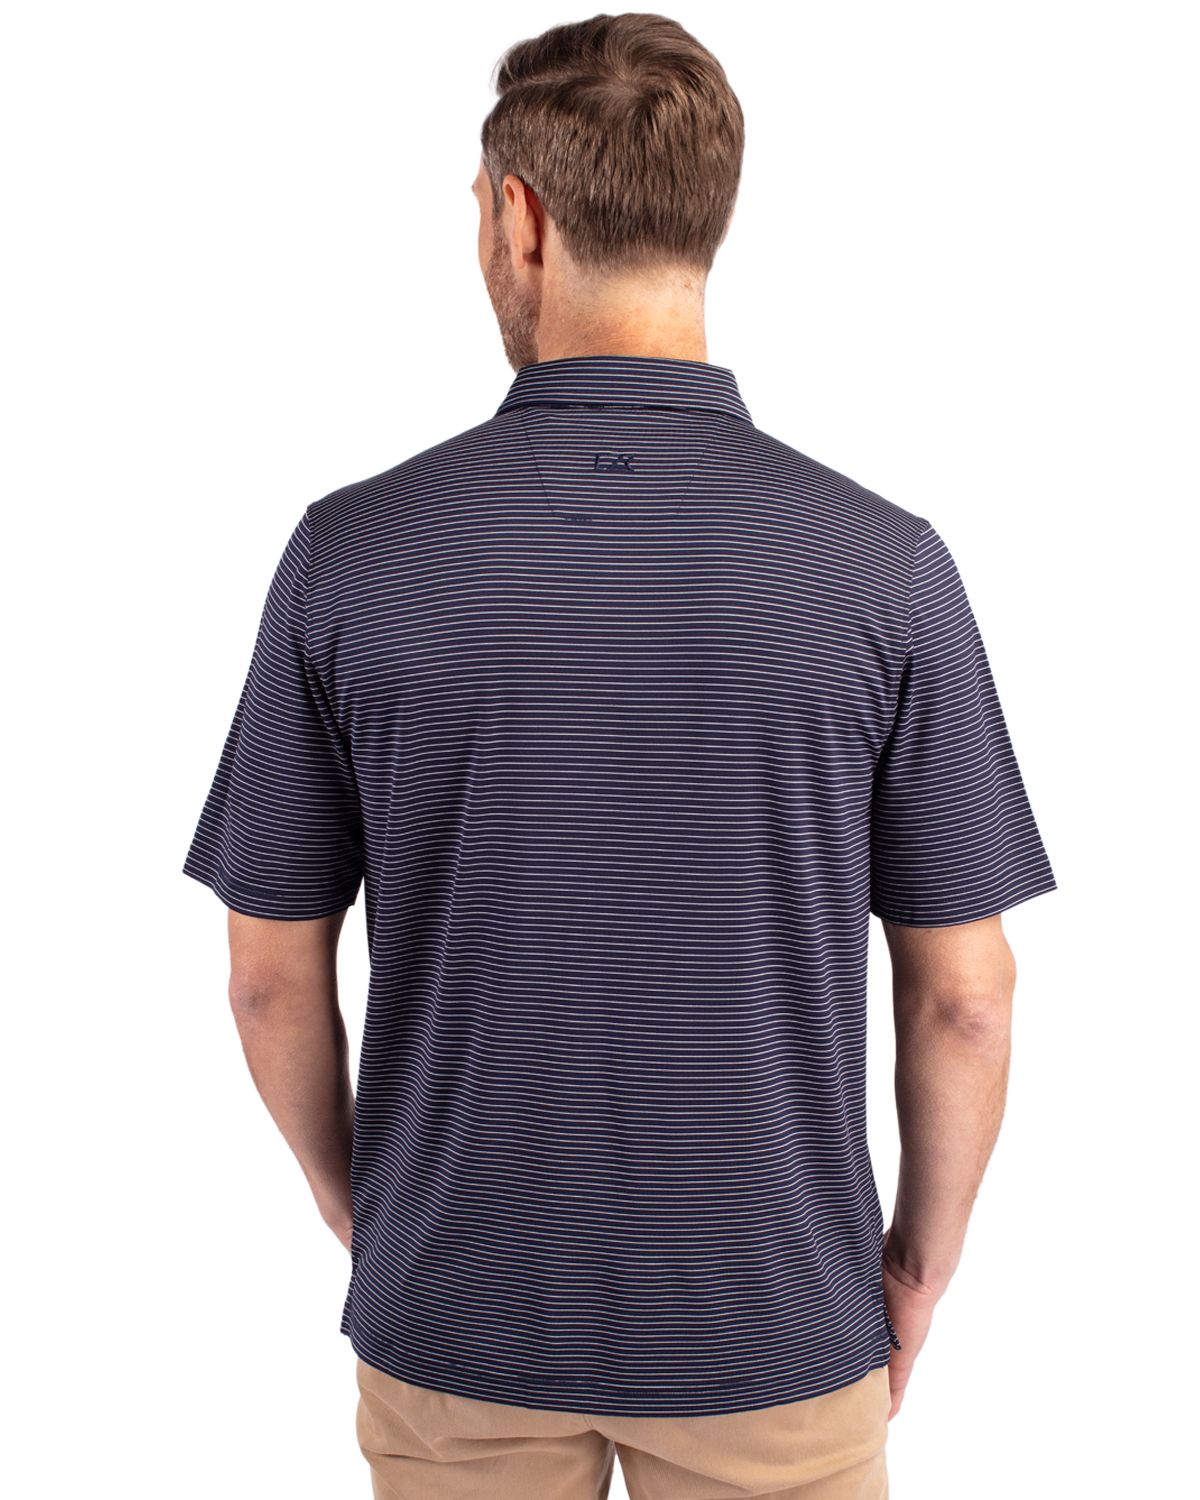 Cutter & Buck Forge Pencil Stripe Polo Liberty Navy